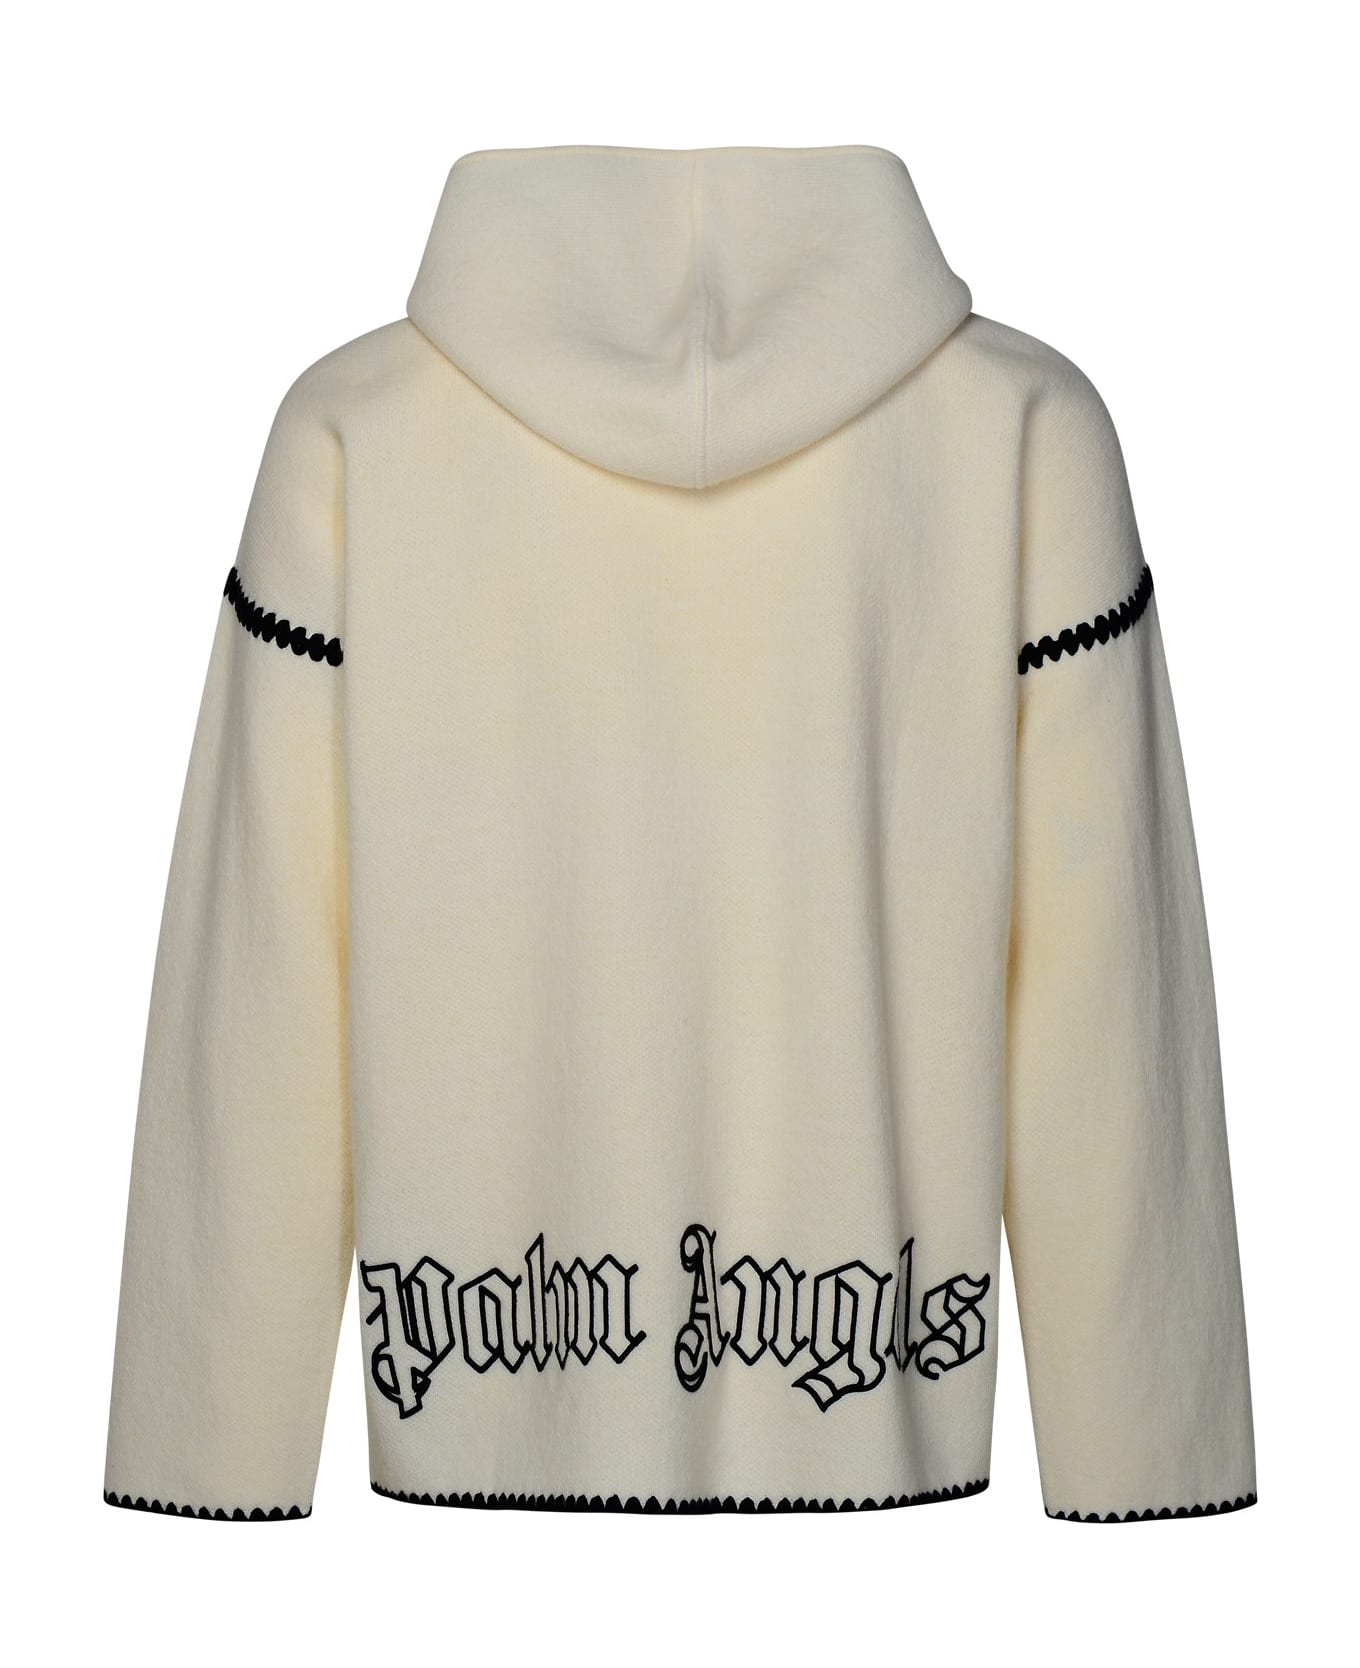 Palm Angels White Wool Blend Sweater - White